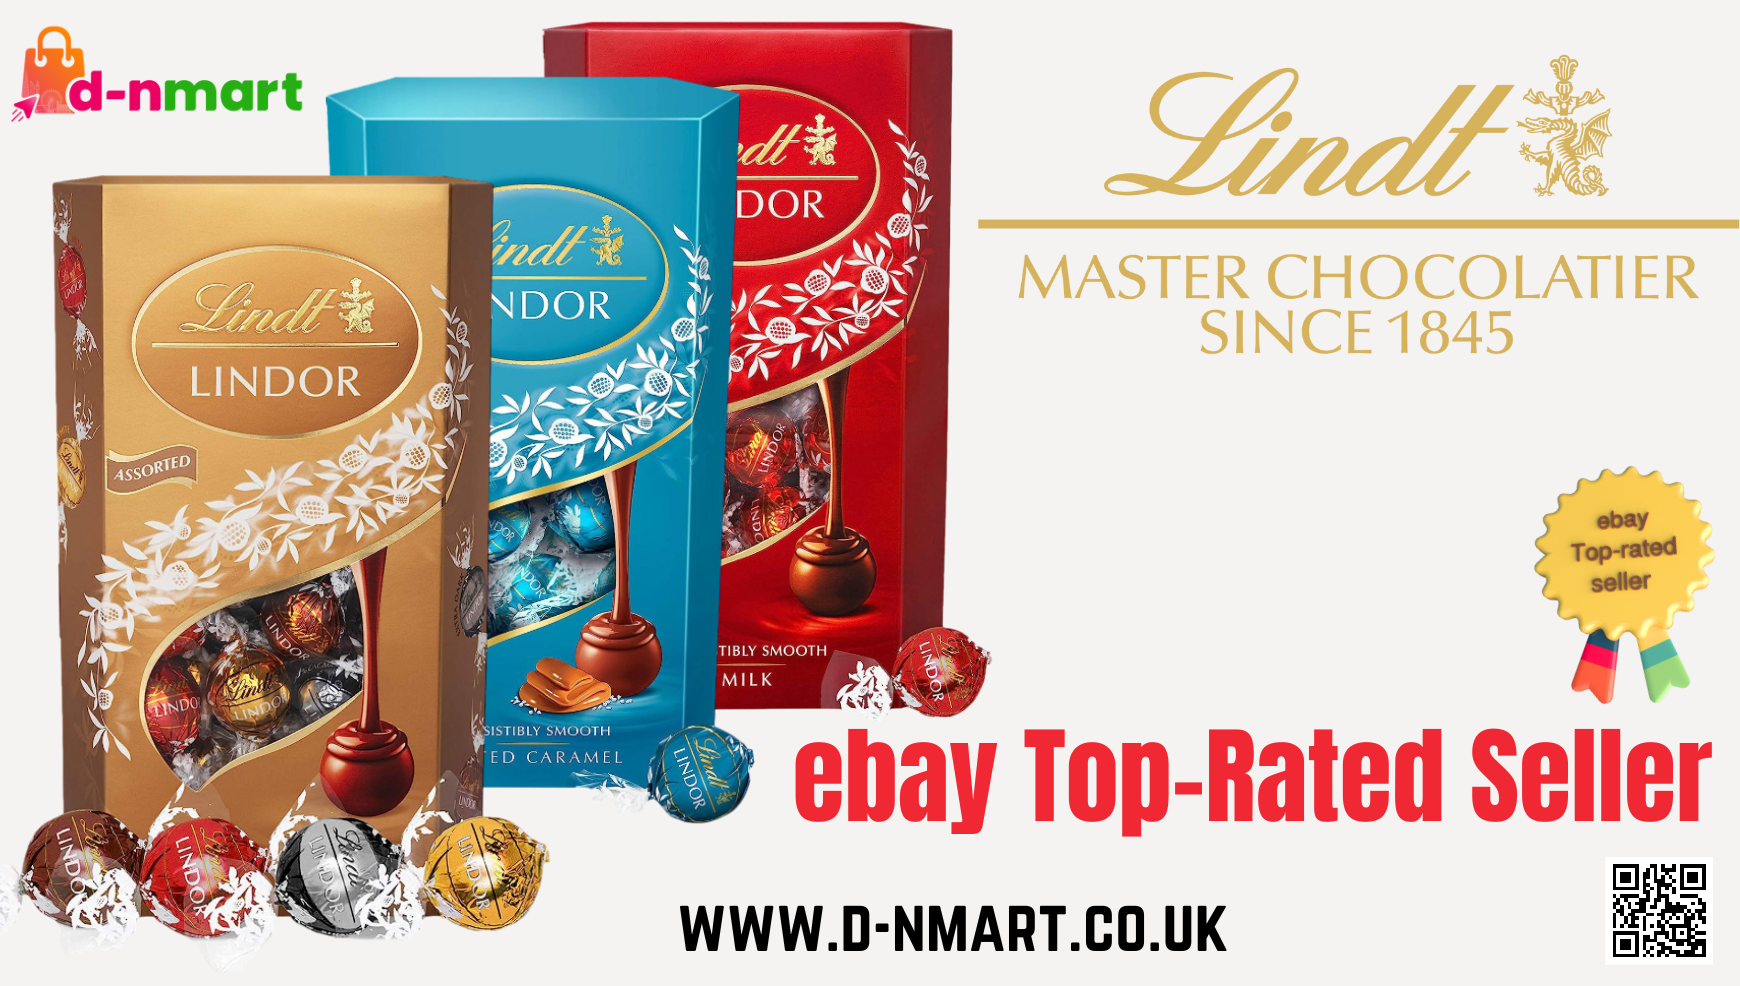 Lindt Lindor Milk Chocolate Truffles Box - approx. 48 Balls, 600 g -  Perfect for Sharing and Gifting - Chocolate Balls with a Smooth Melting  Filling